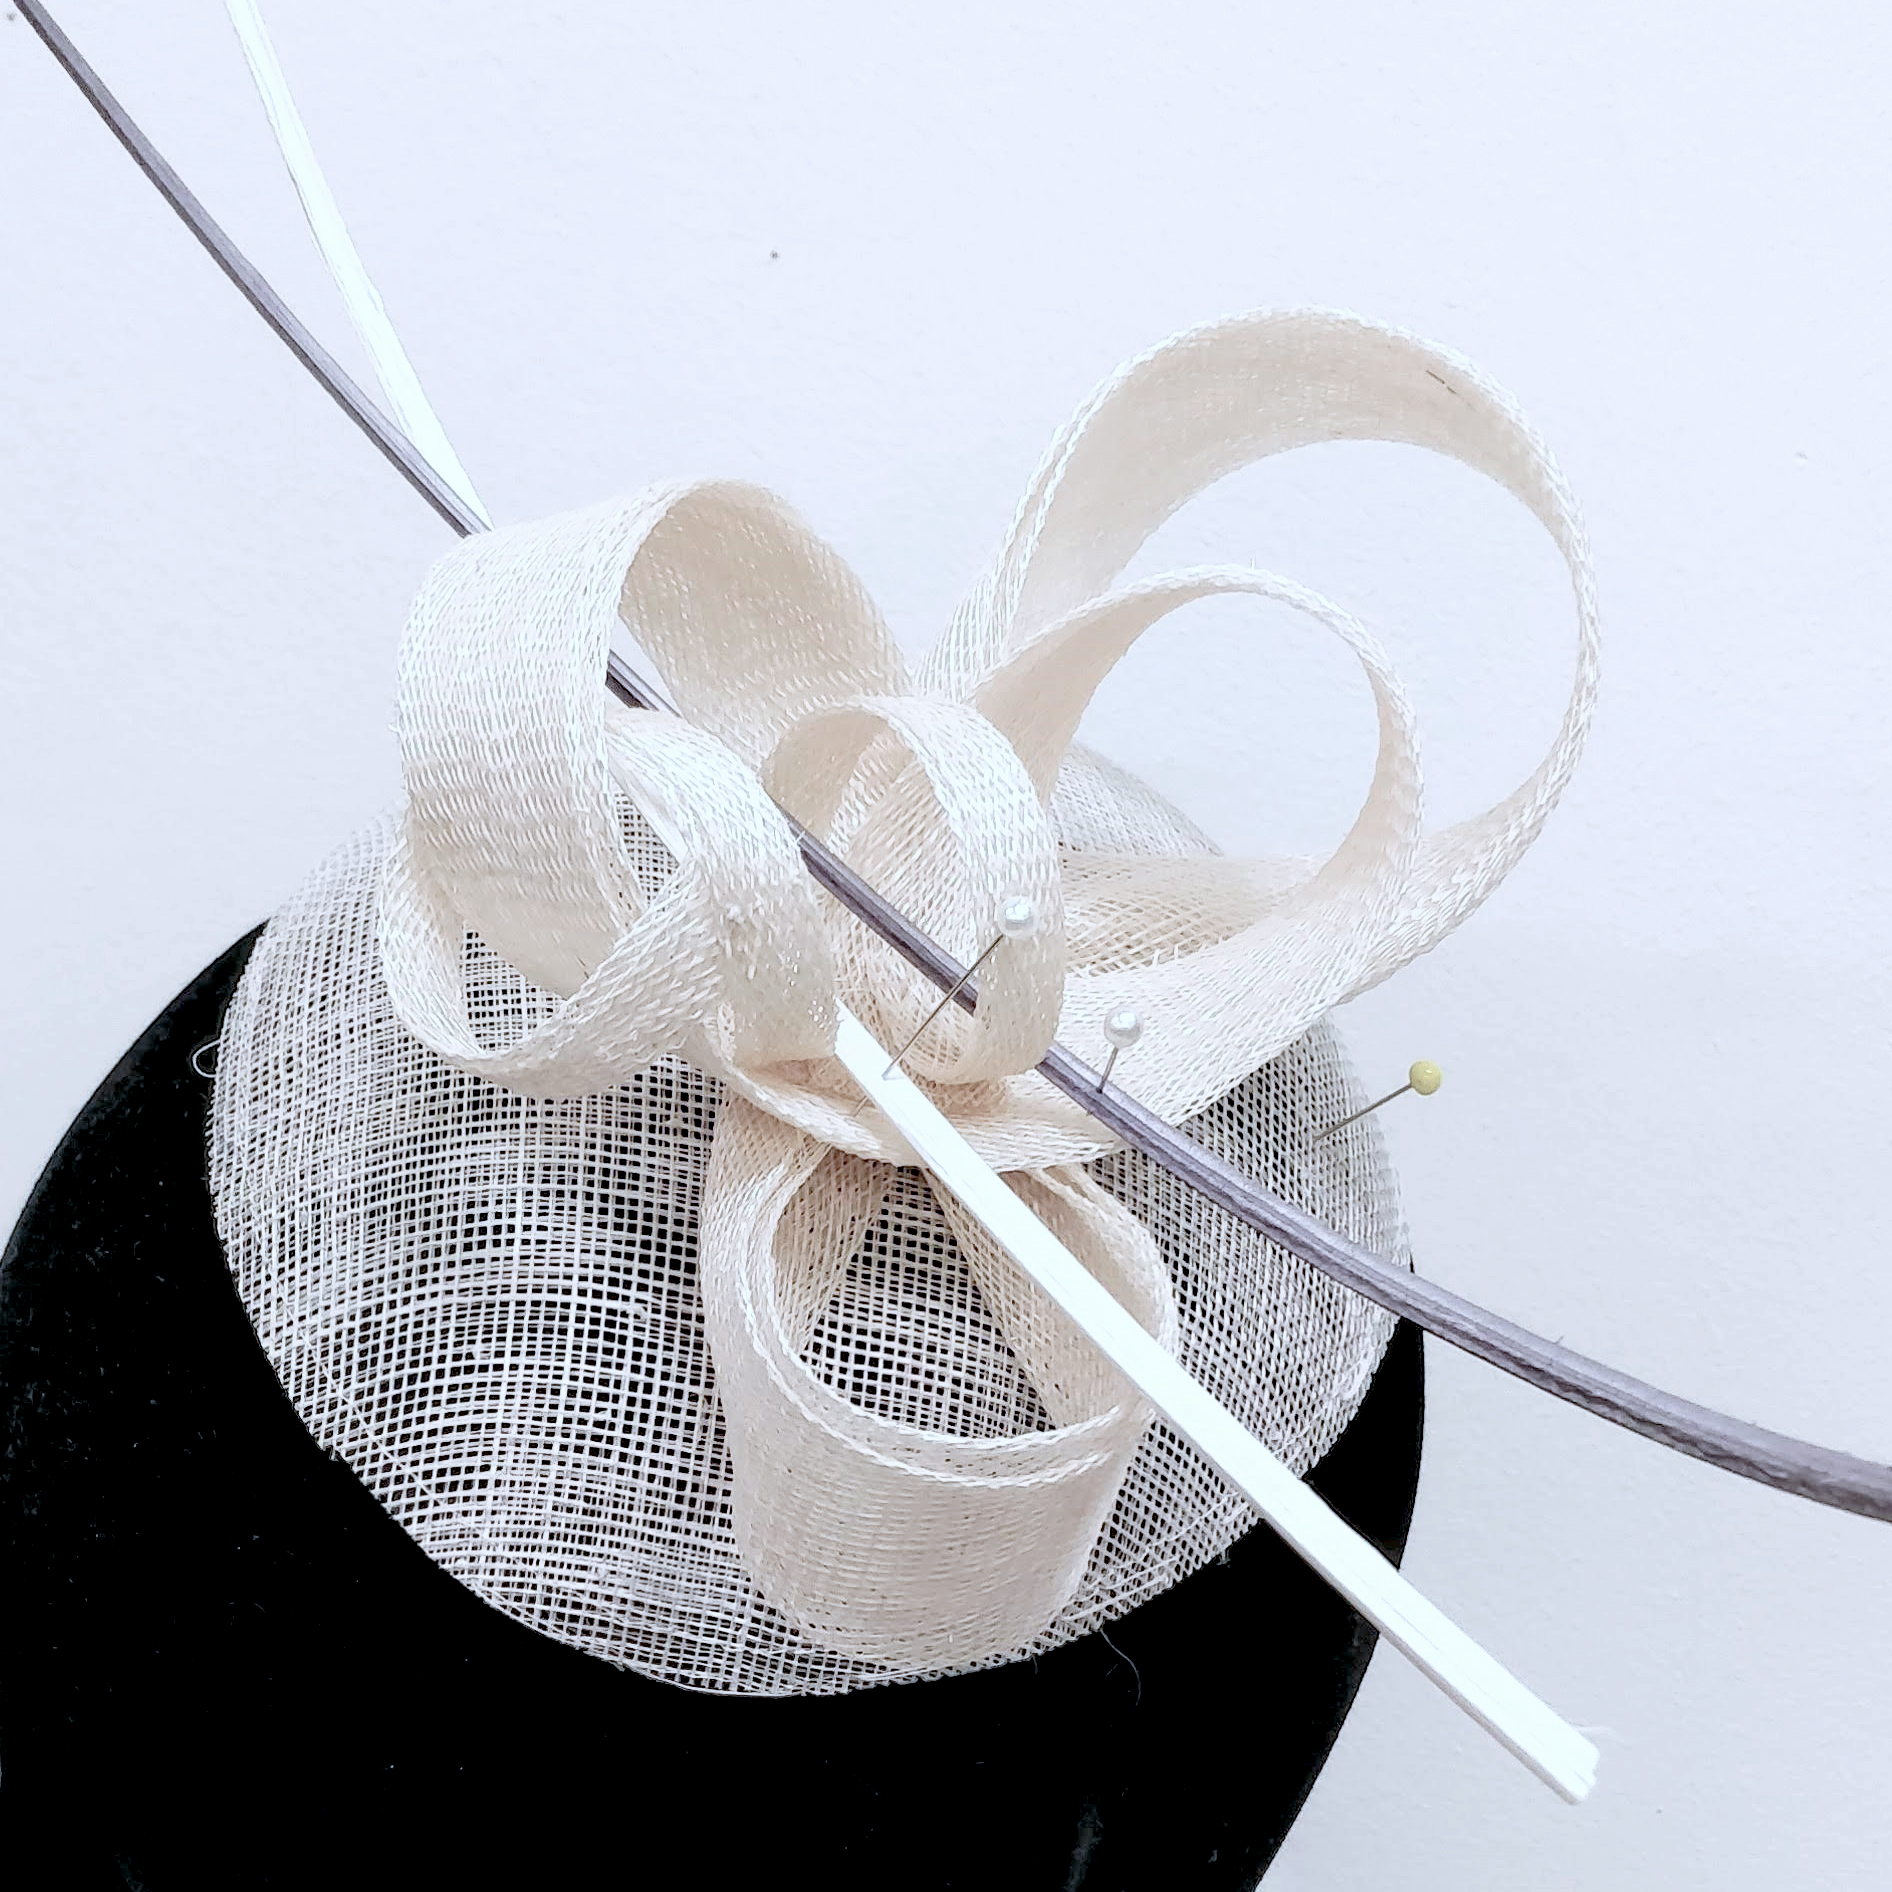 Introduction to Millinery